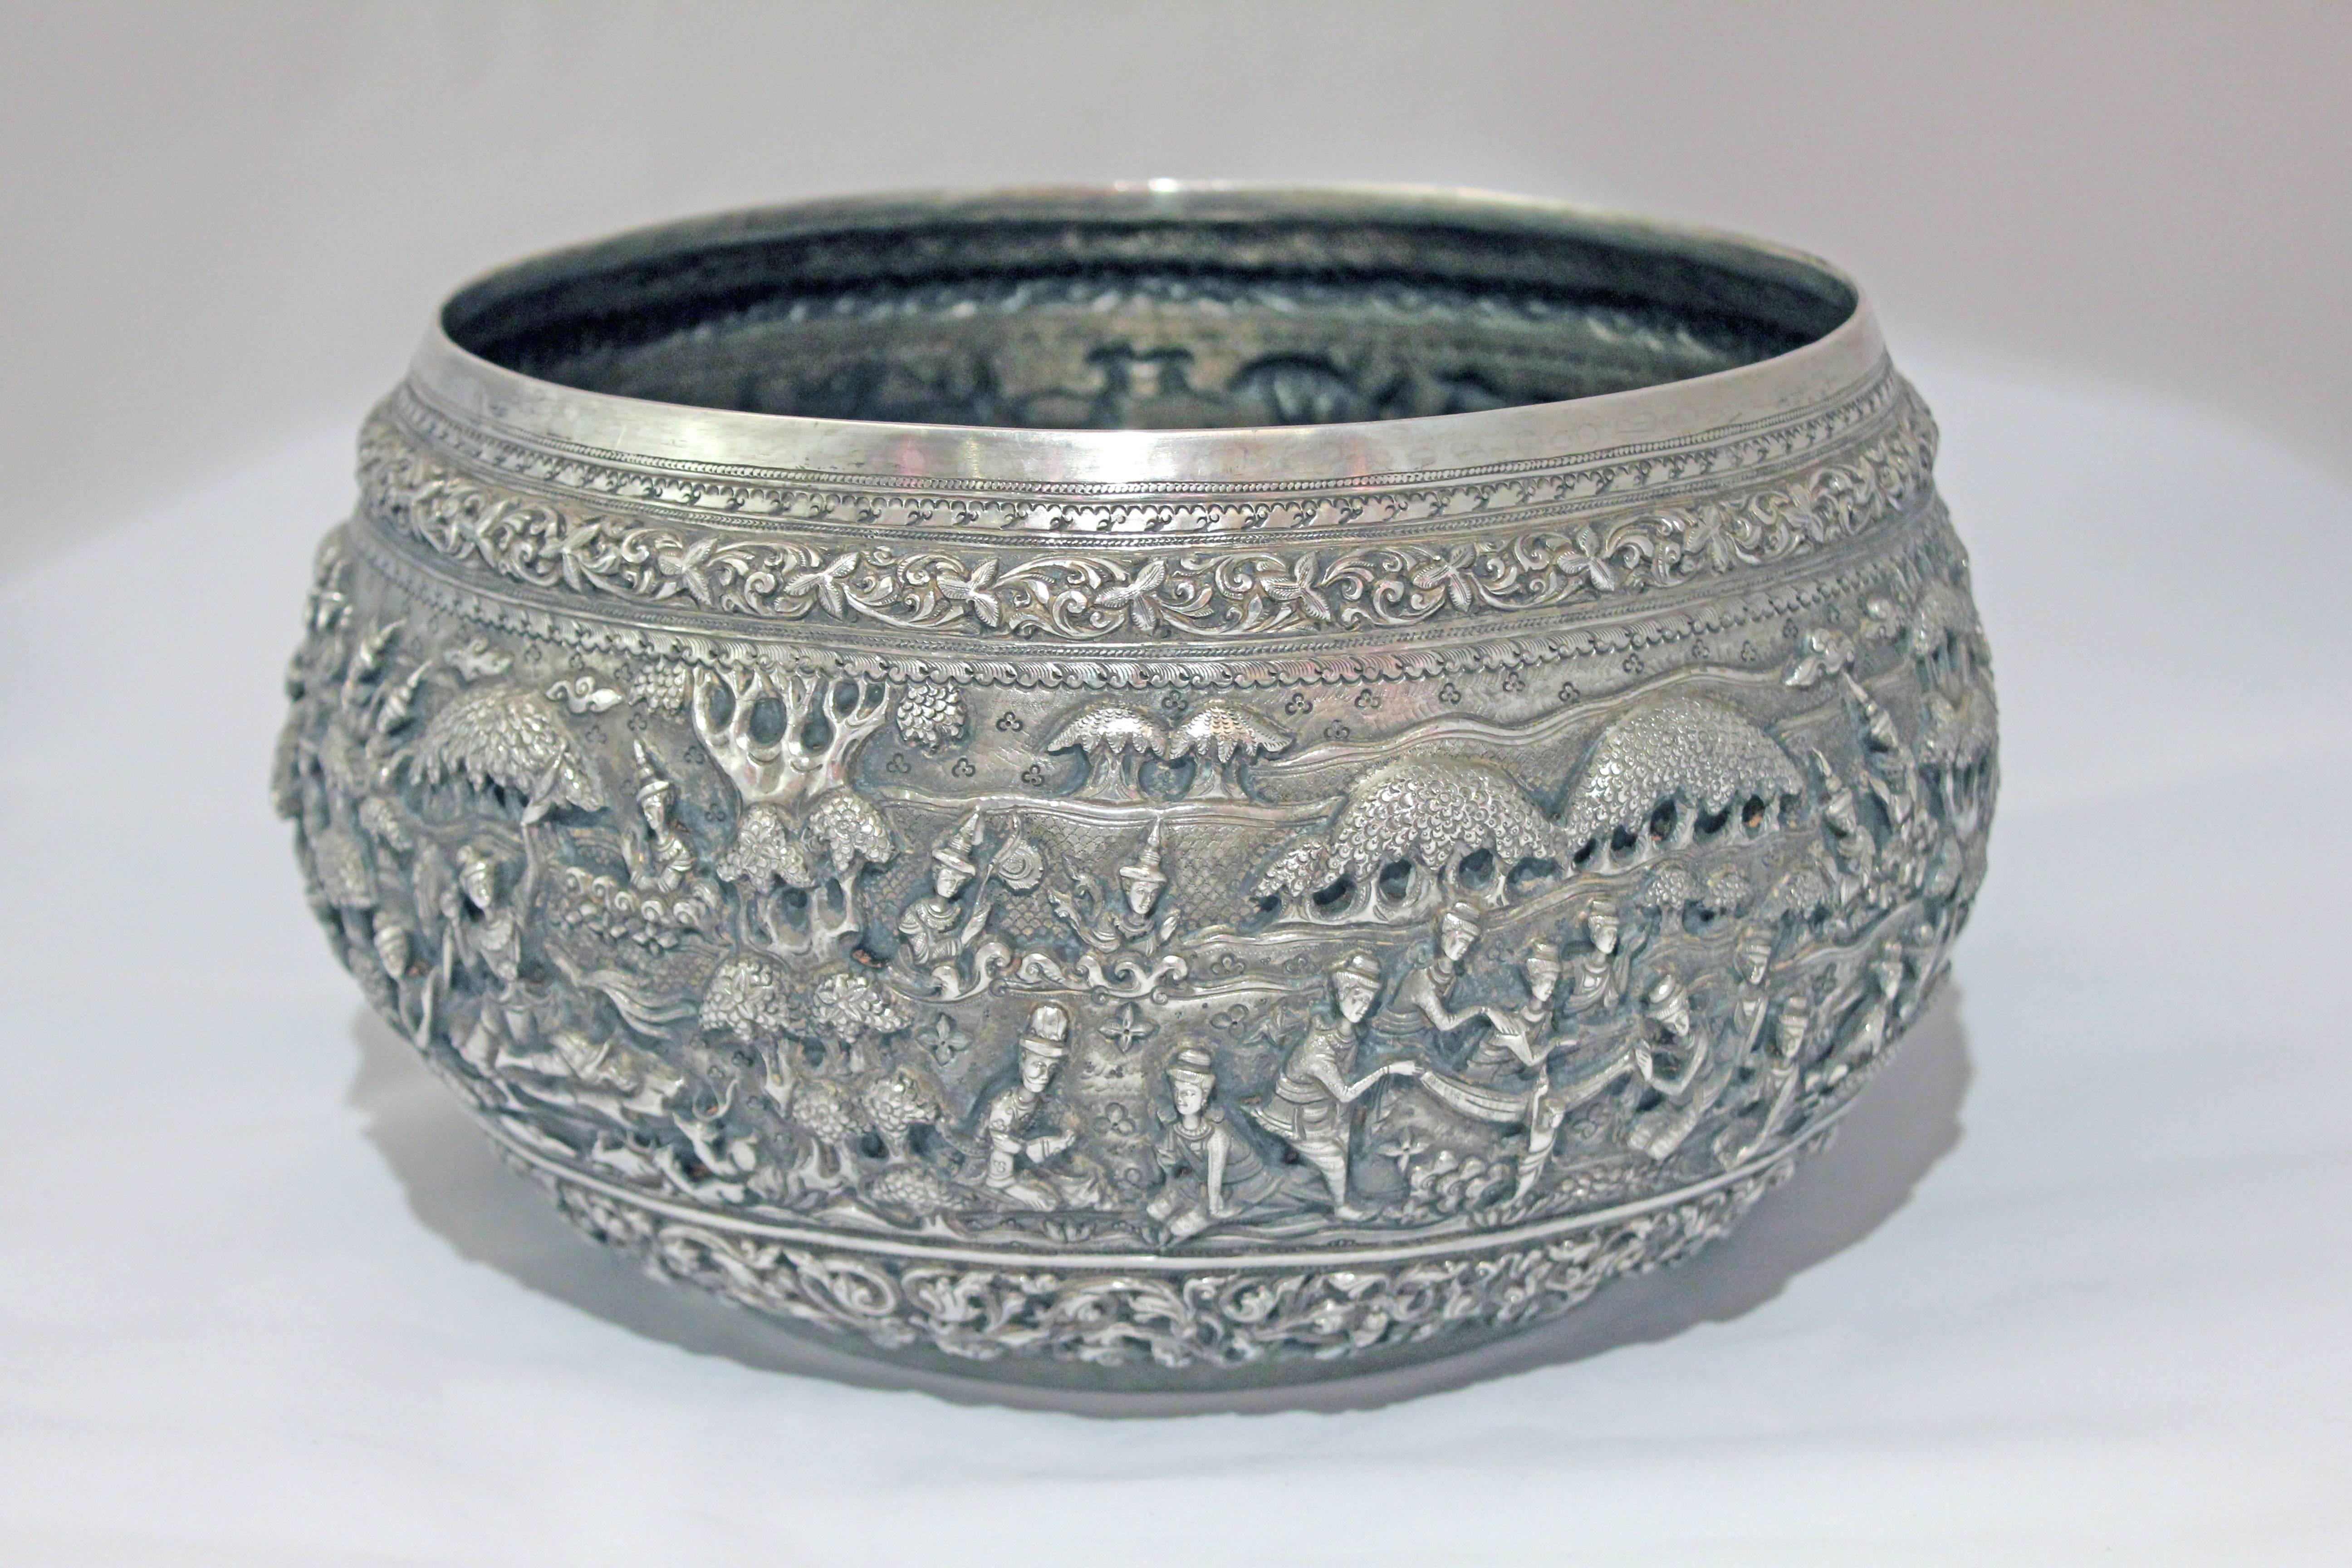 Hand-Crafted Solid Silver Hand-Worked Burmese Ceremonial Bowl, Jataka Scenes in Relief, Shan 